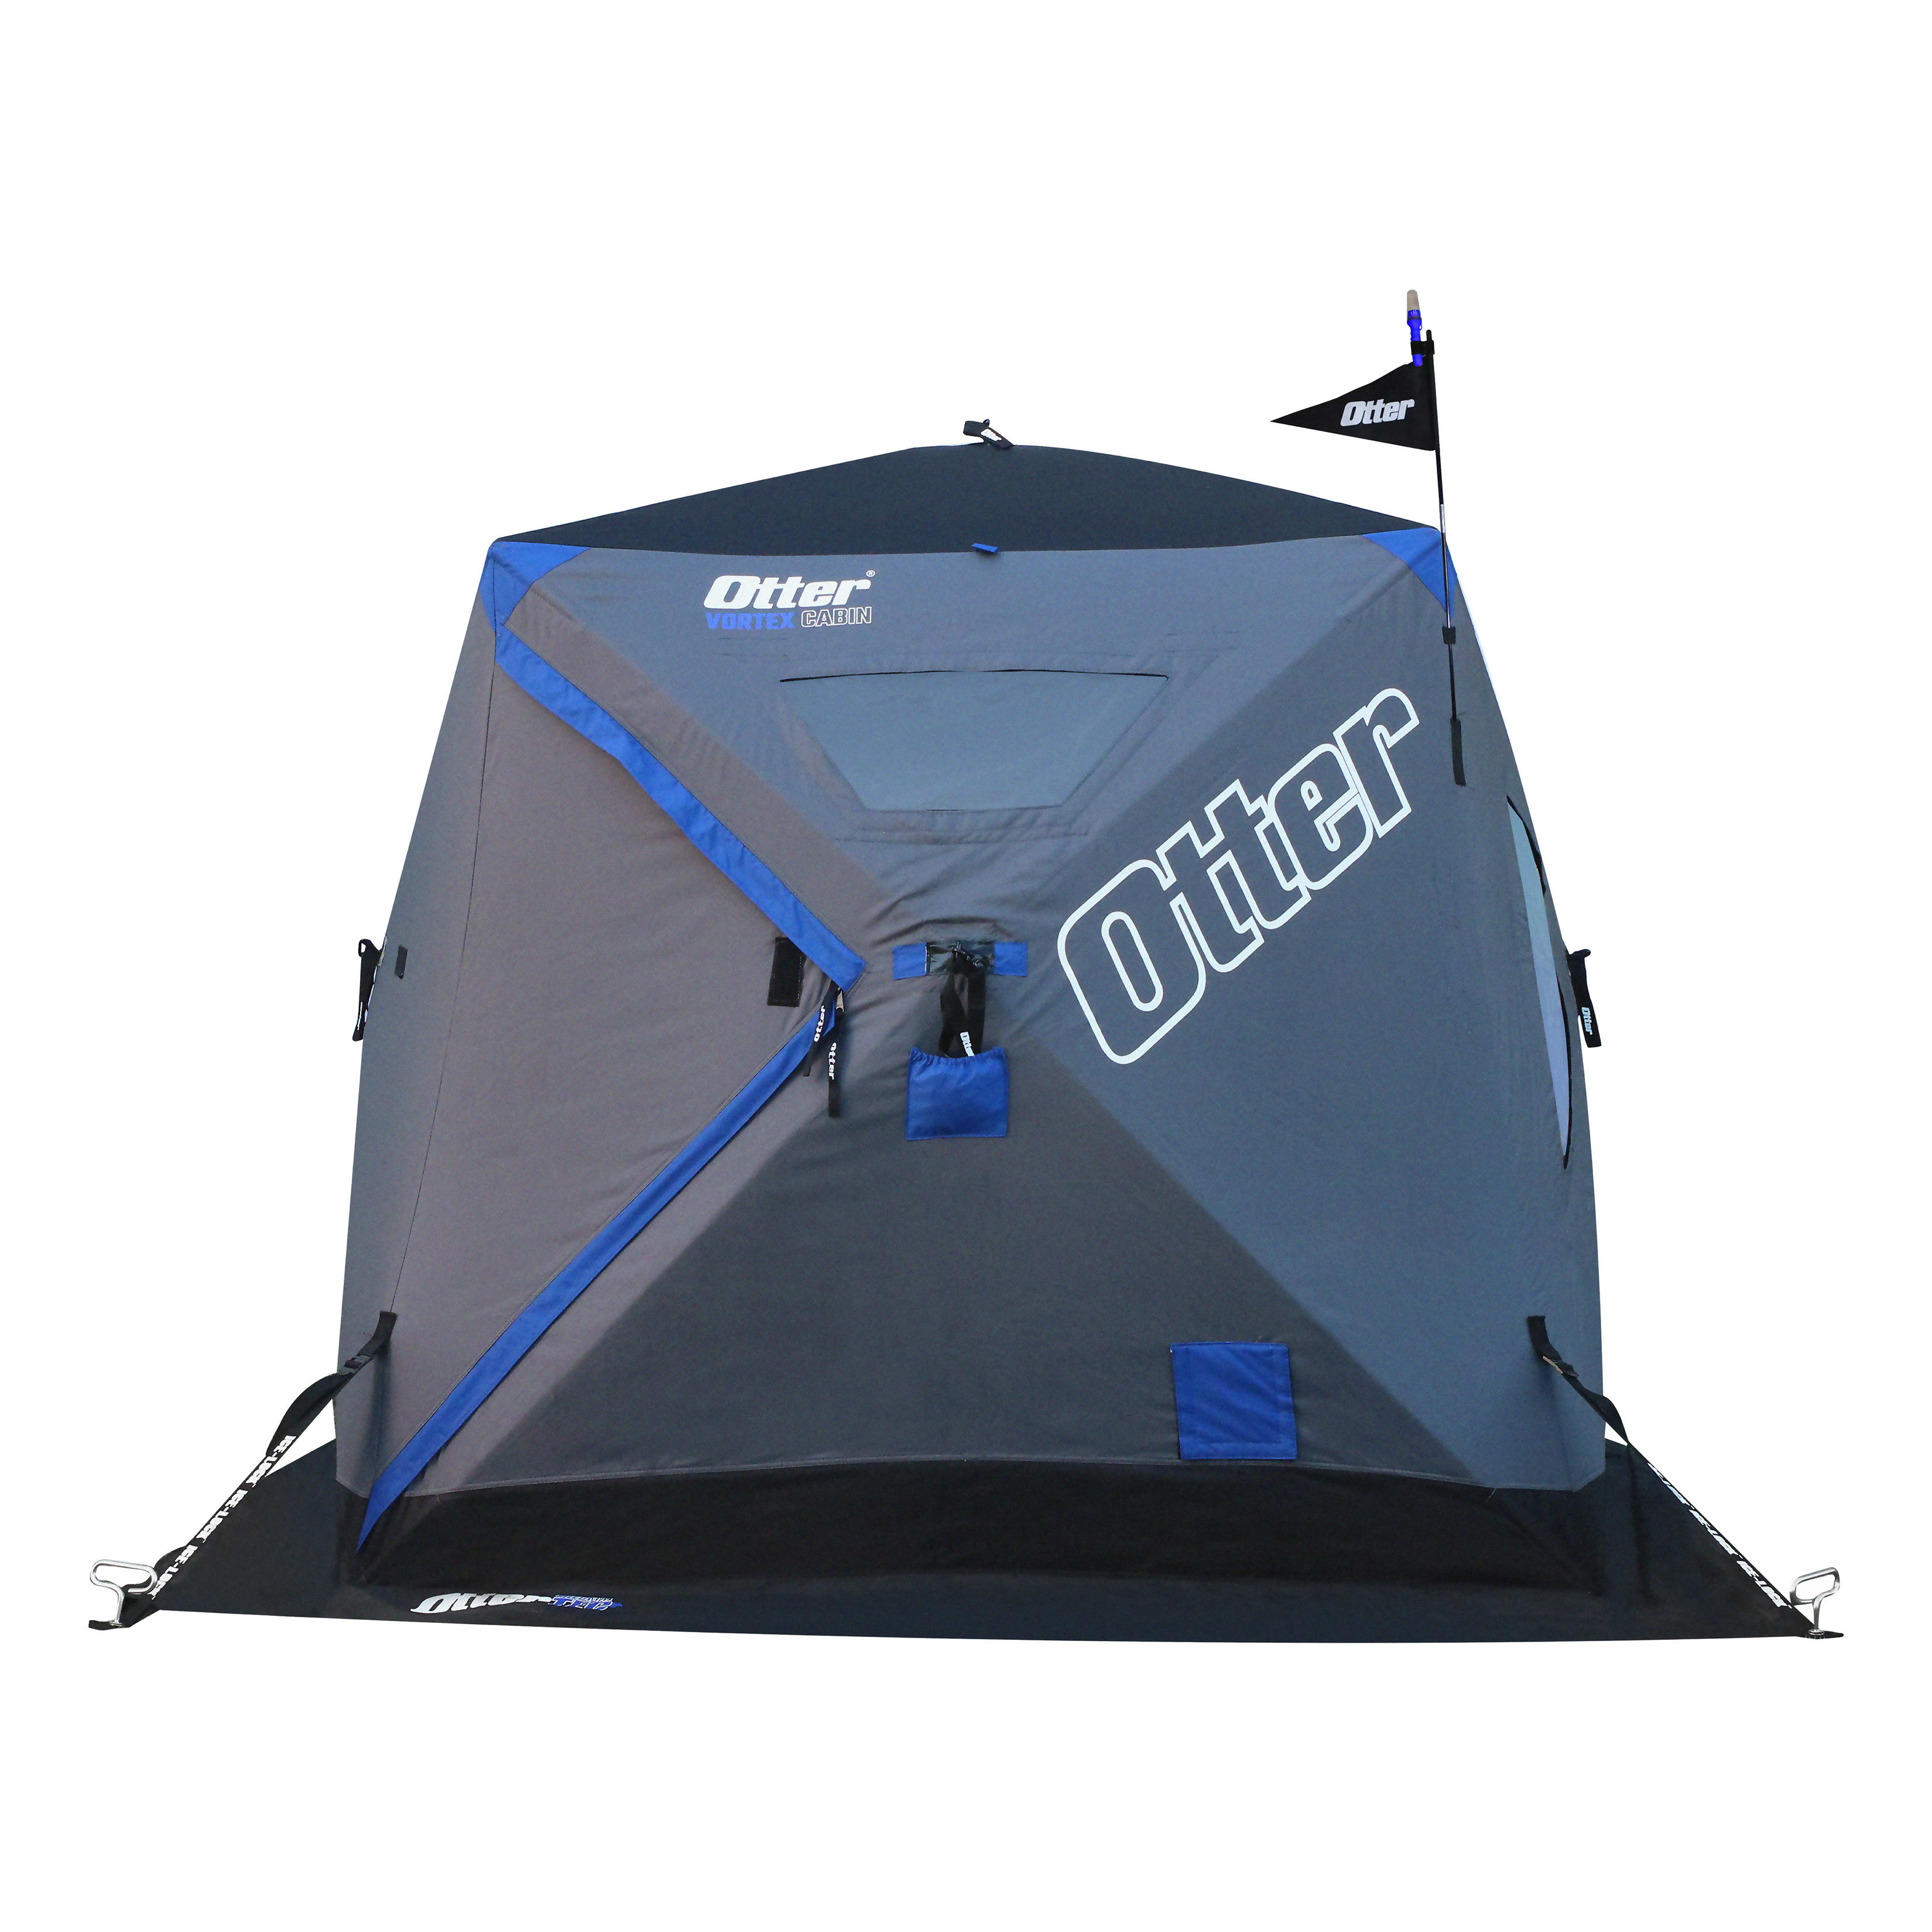 Otter® Outdoors Vortex Cabin Thermal Hub Shelter